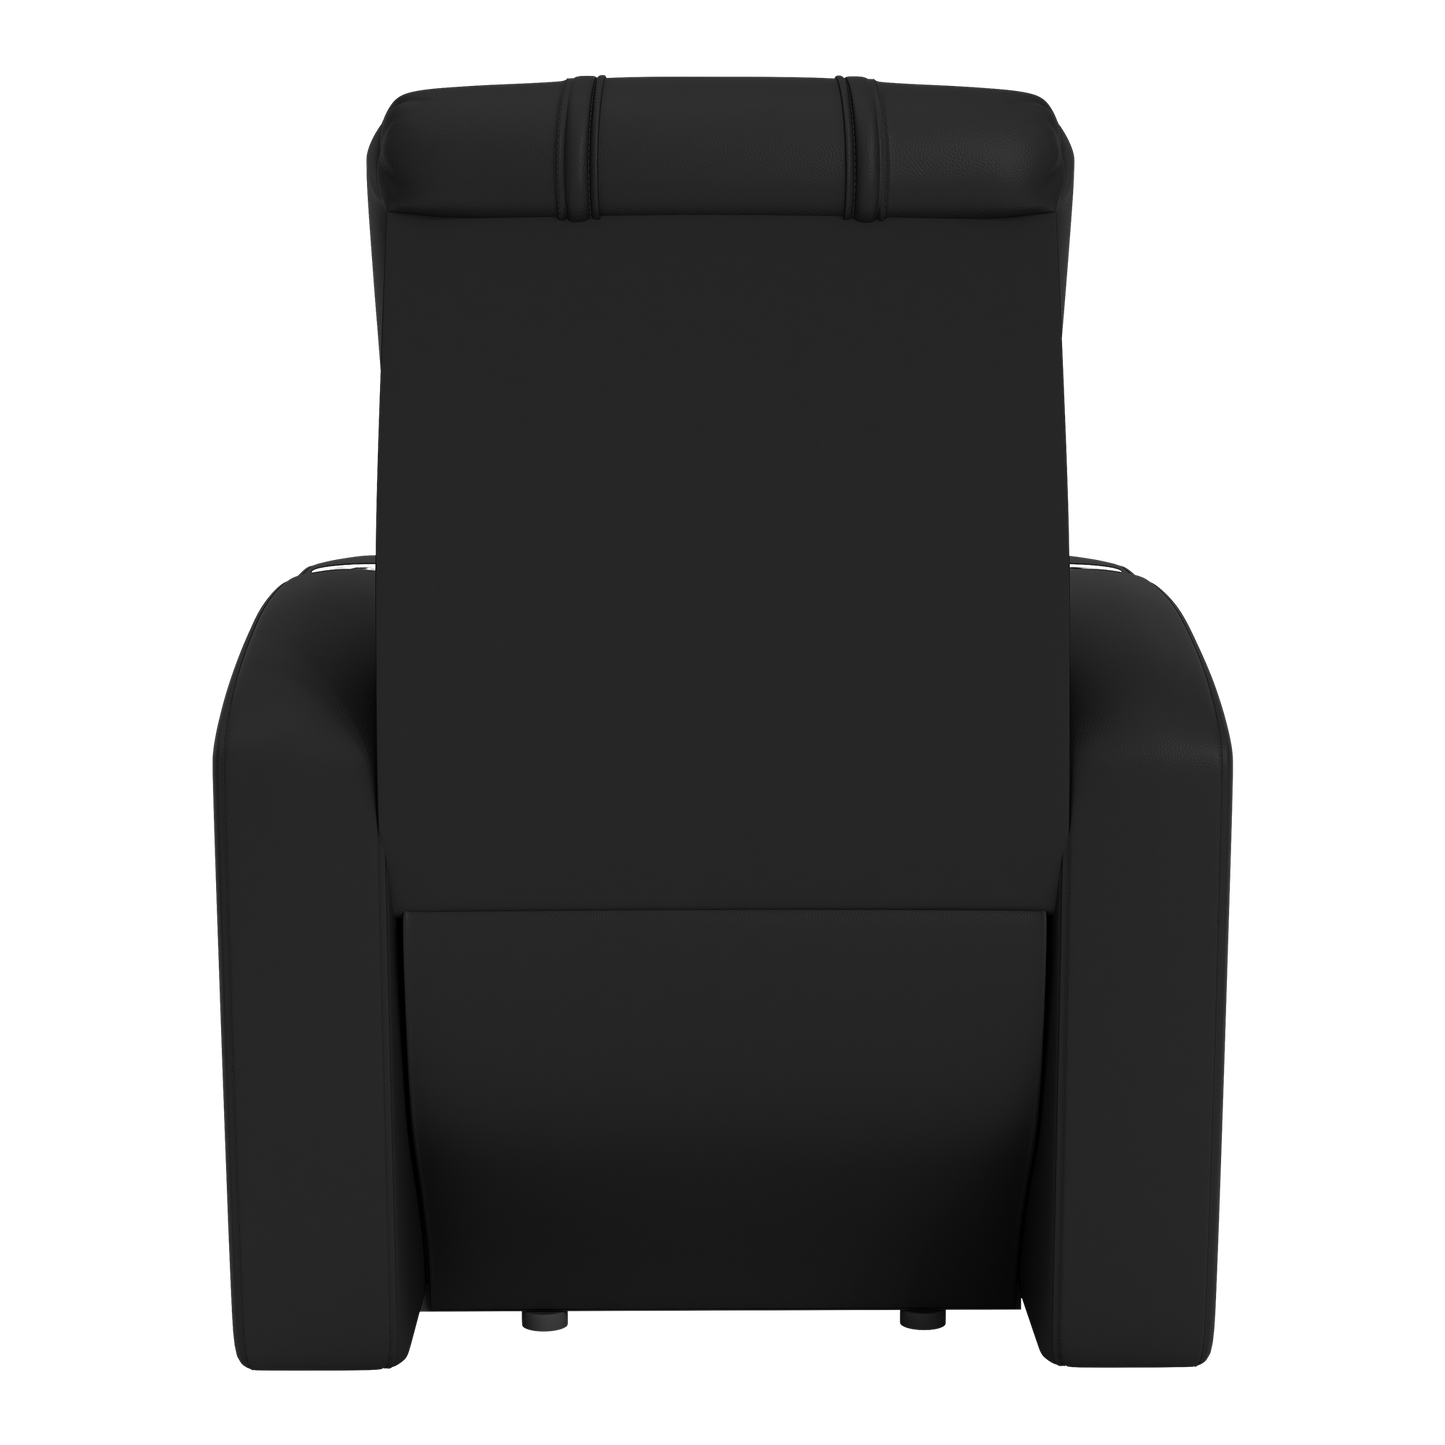 Stealth Recliner with Washington Capitals Logo